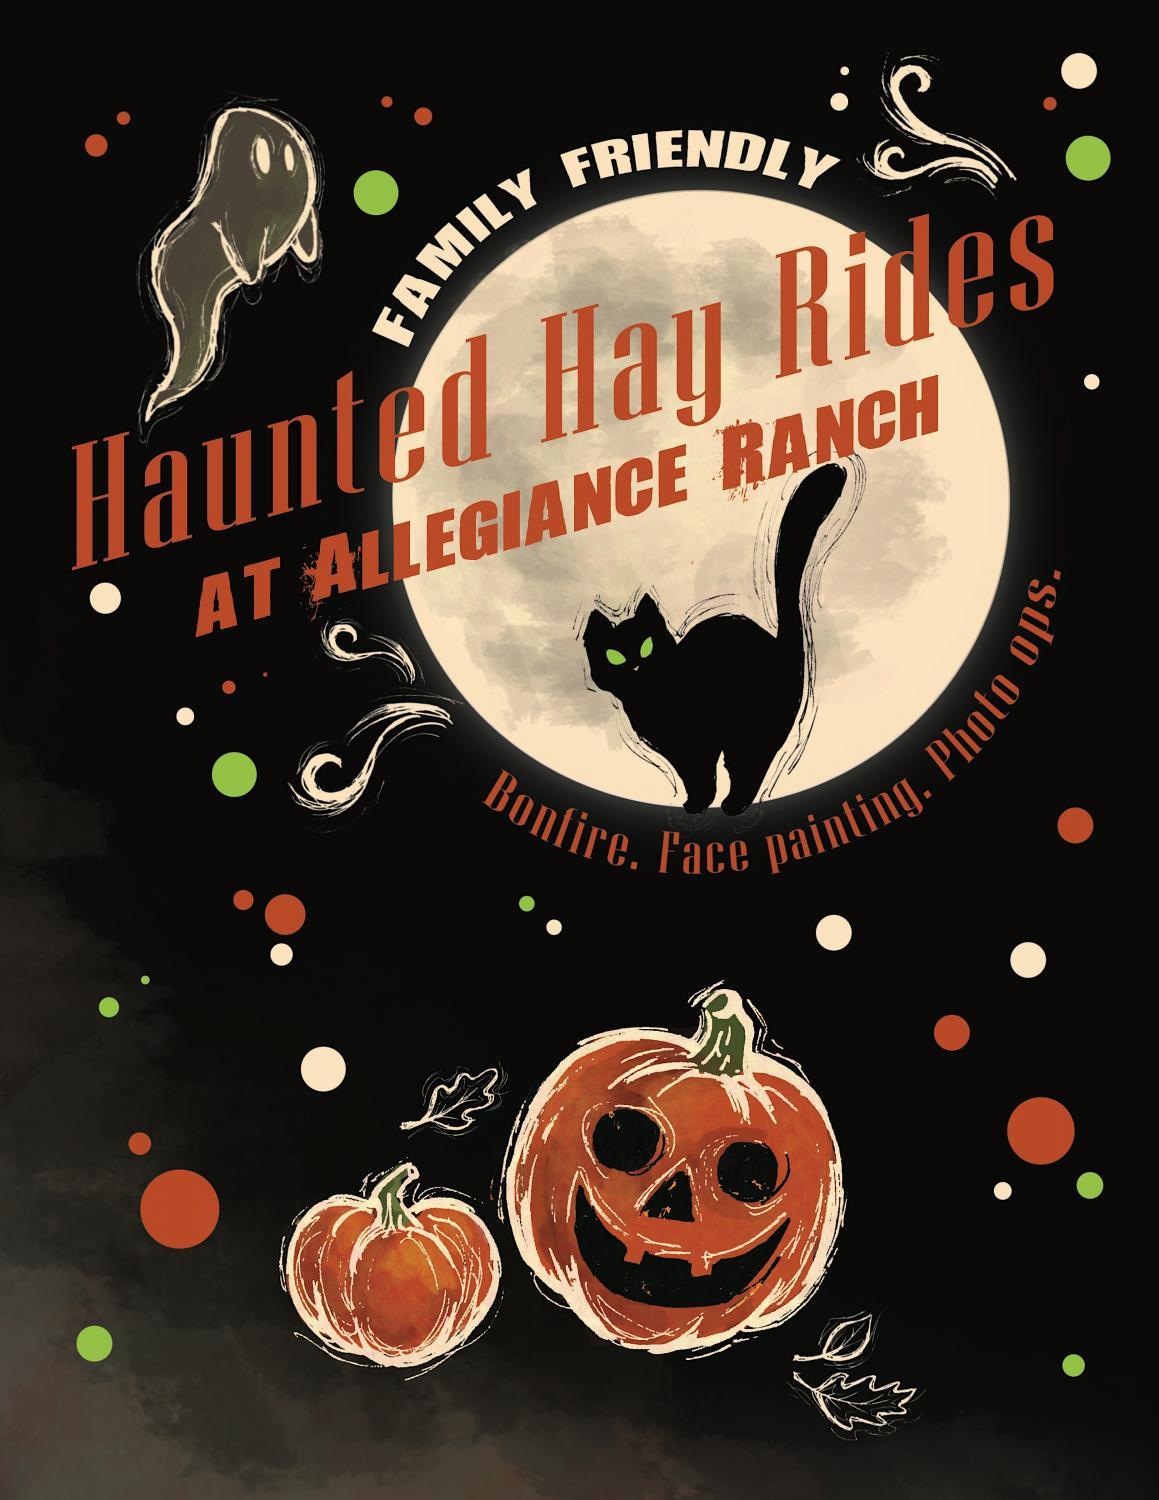 Haunted Hay Rides at Allegiance Ranch
Sat Oct 22, 6:00 PM - Sat Oct 22, 9:00 PM
in 3 days